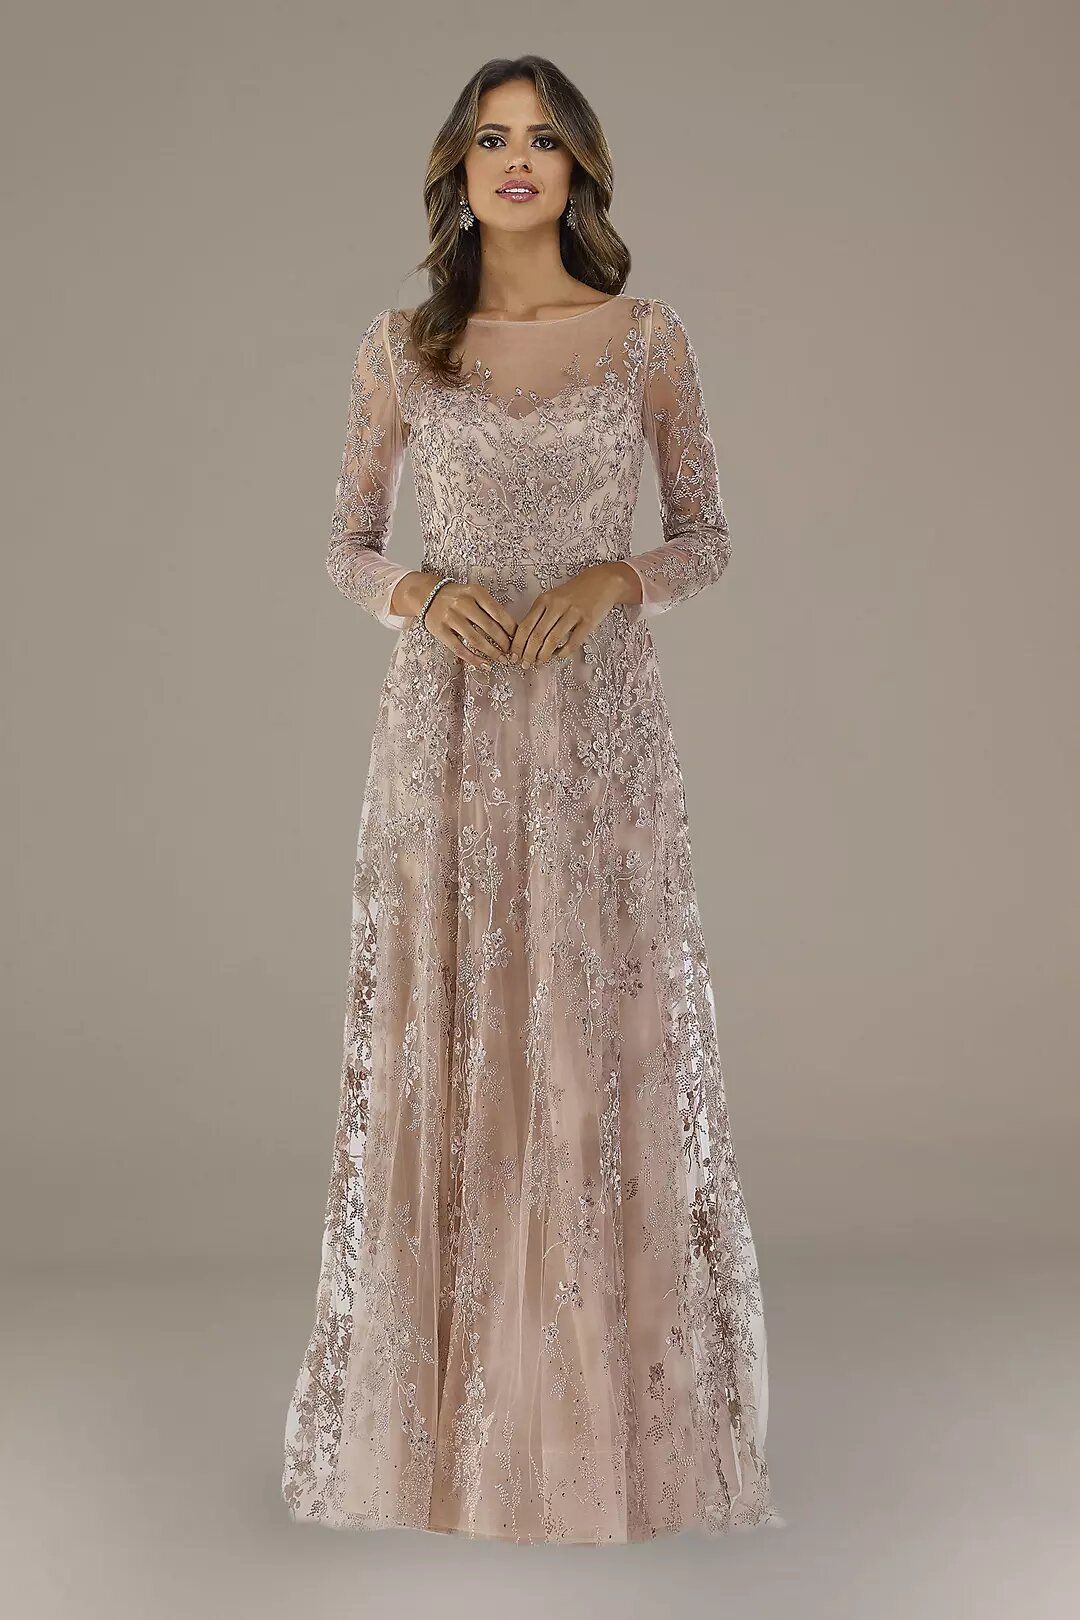 Lara Evette Lace A-Line Long Sleeve Gown